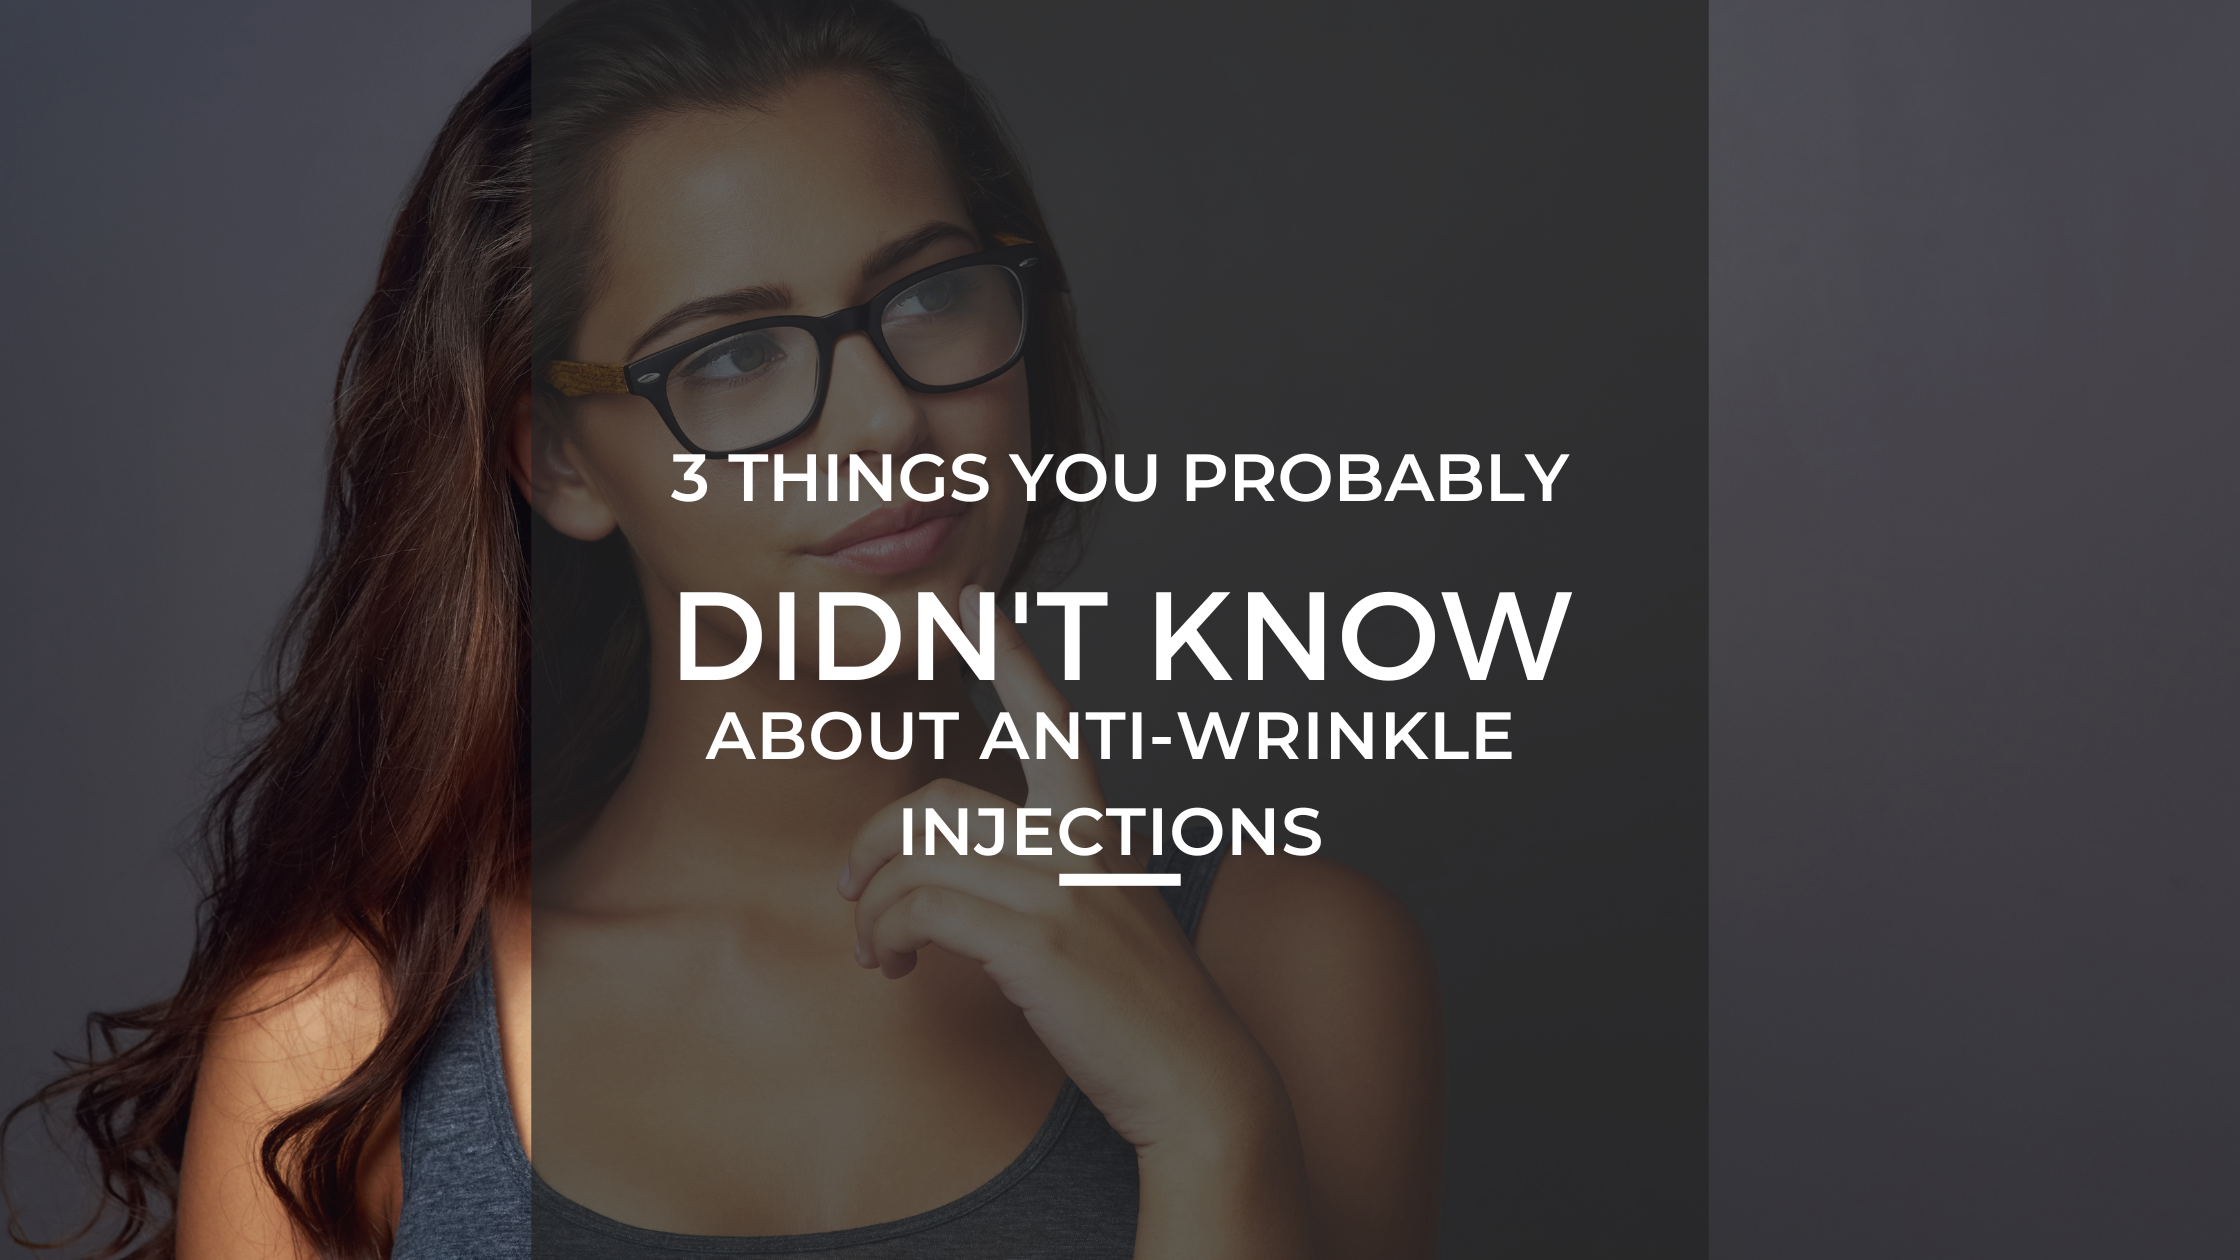 3 things you probably didn't know about anti-wrinkle injections